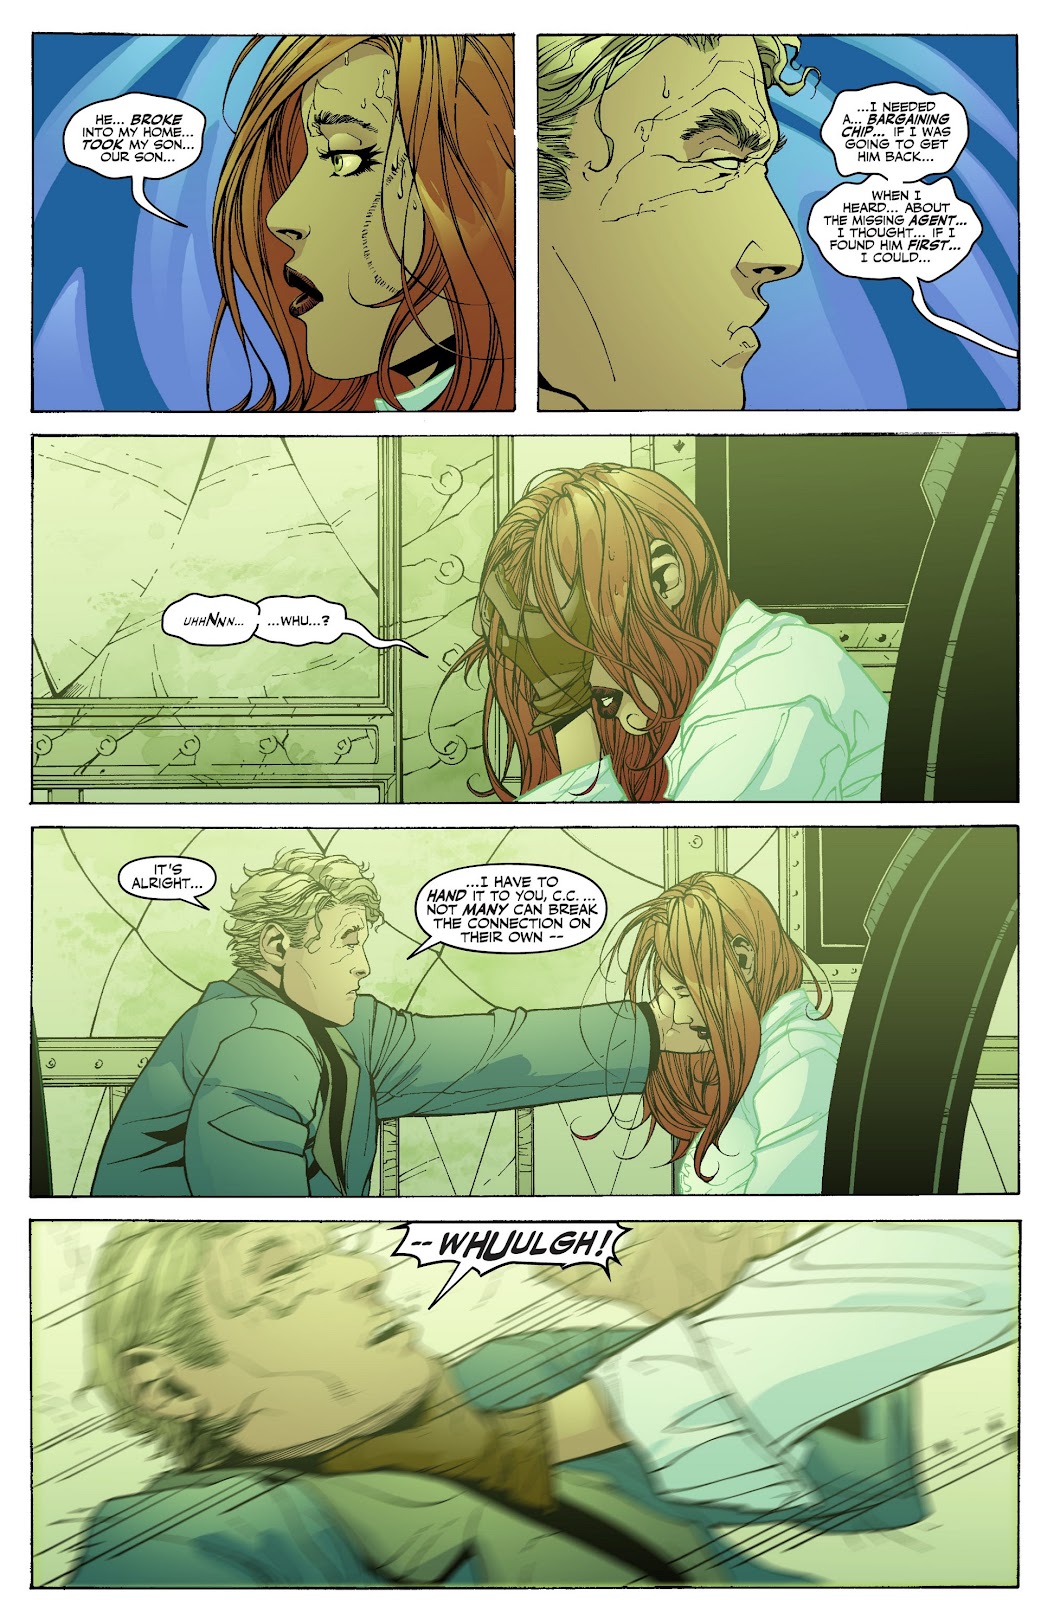 Wildcats Version 3.0 Issue #4 #4 - English 8